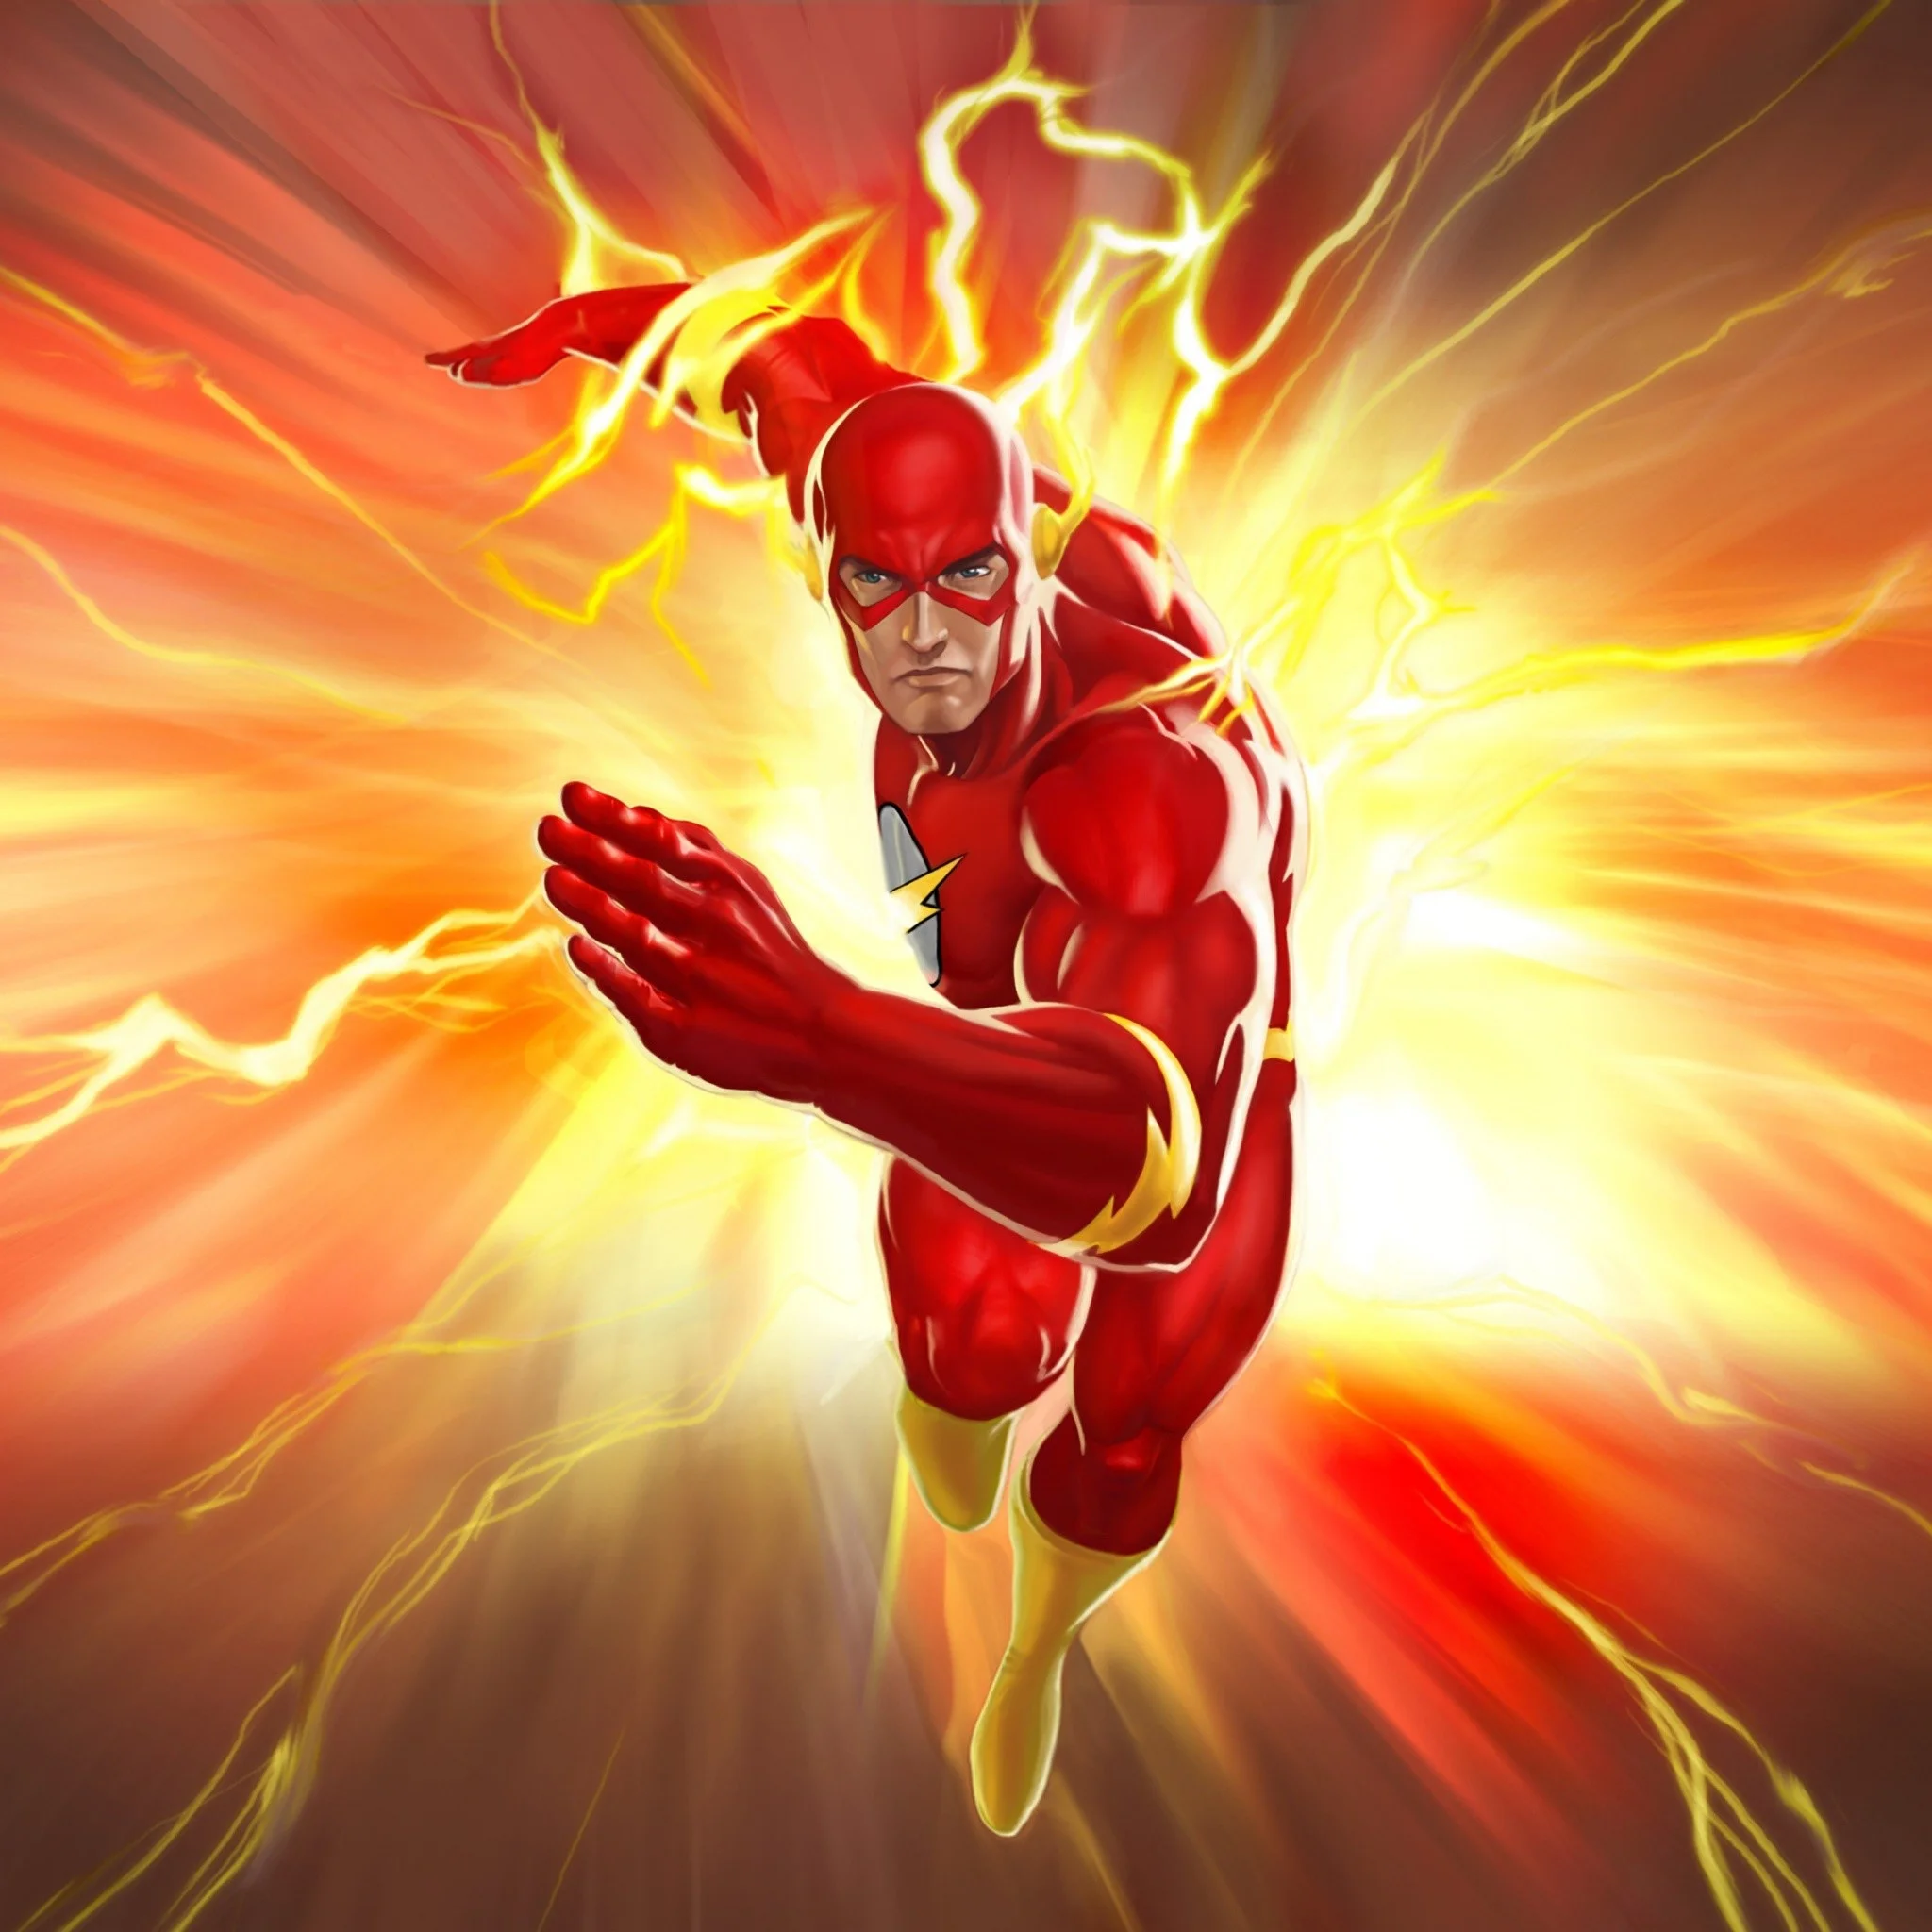 Flashing The Flash. Tap to see more Barry Allen The Flash iPhone, iPad &  Android wallpapers, backgrounds, fondos!